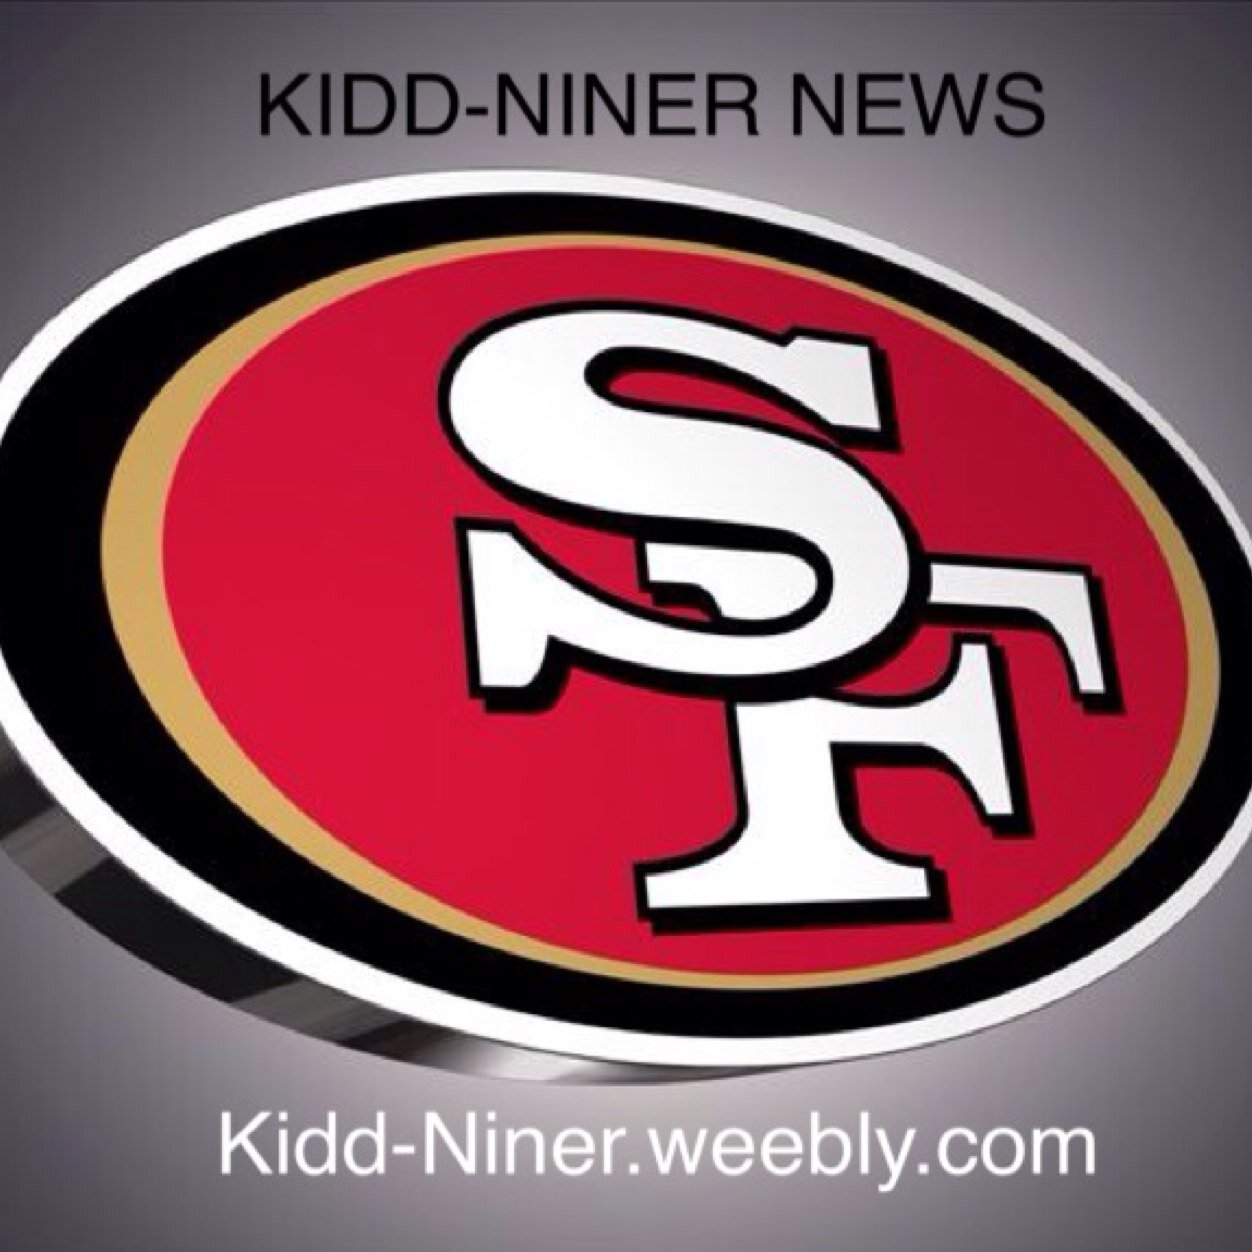 Go to our website to see more news about the 49ers